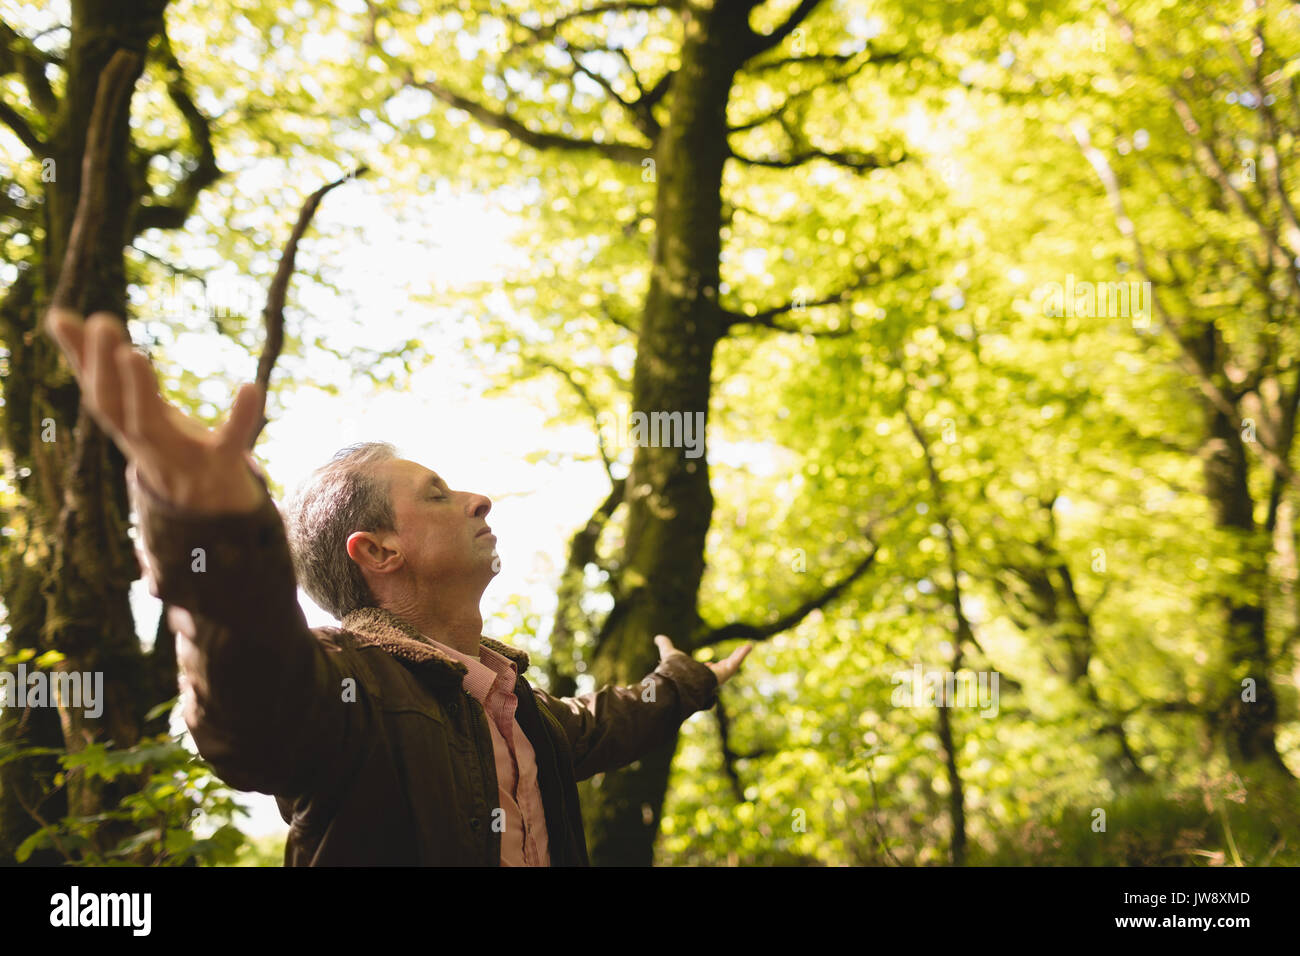 Blissful man standing with arms outstretched in forest on a sunny day Stock Photo